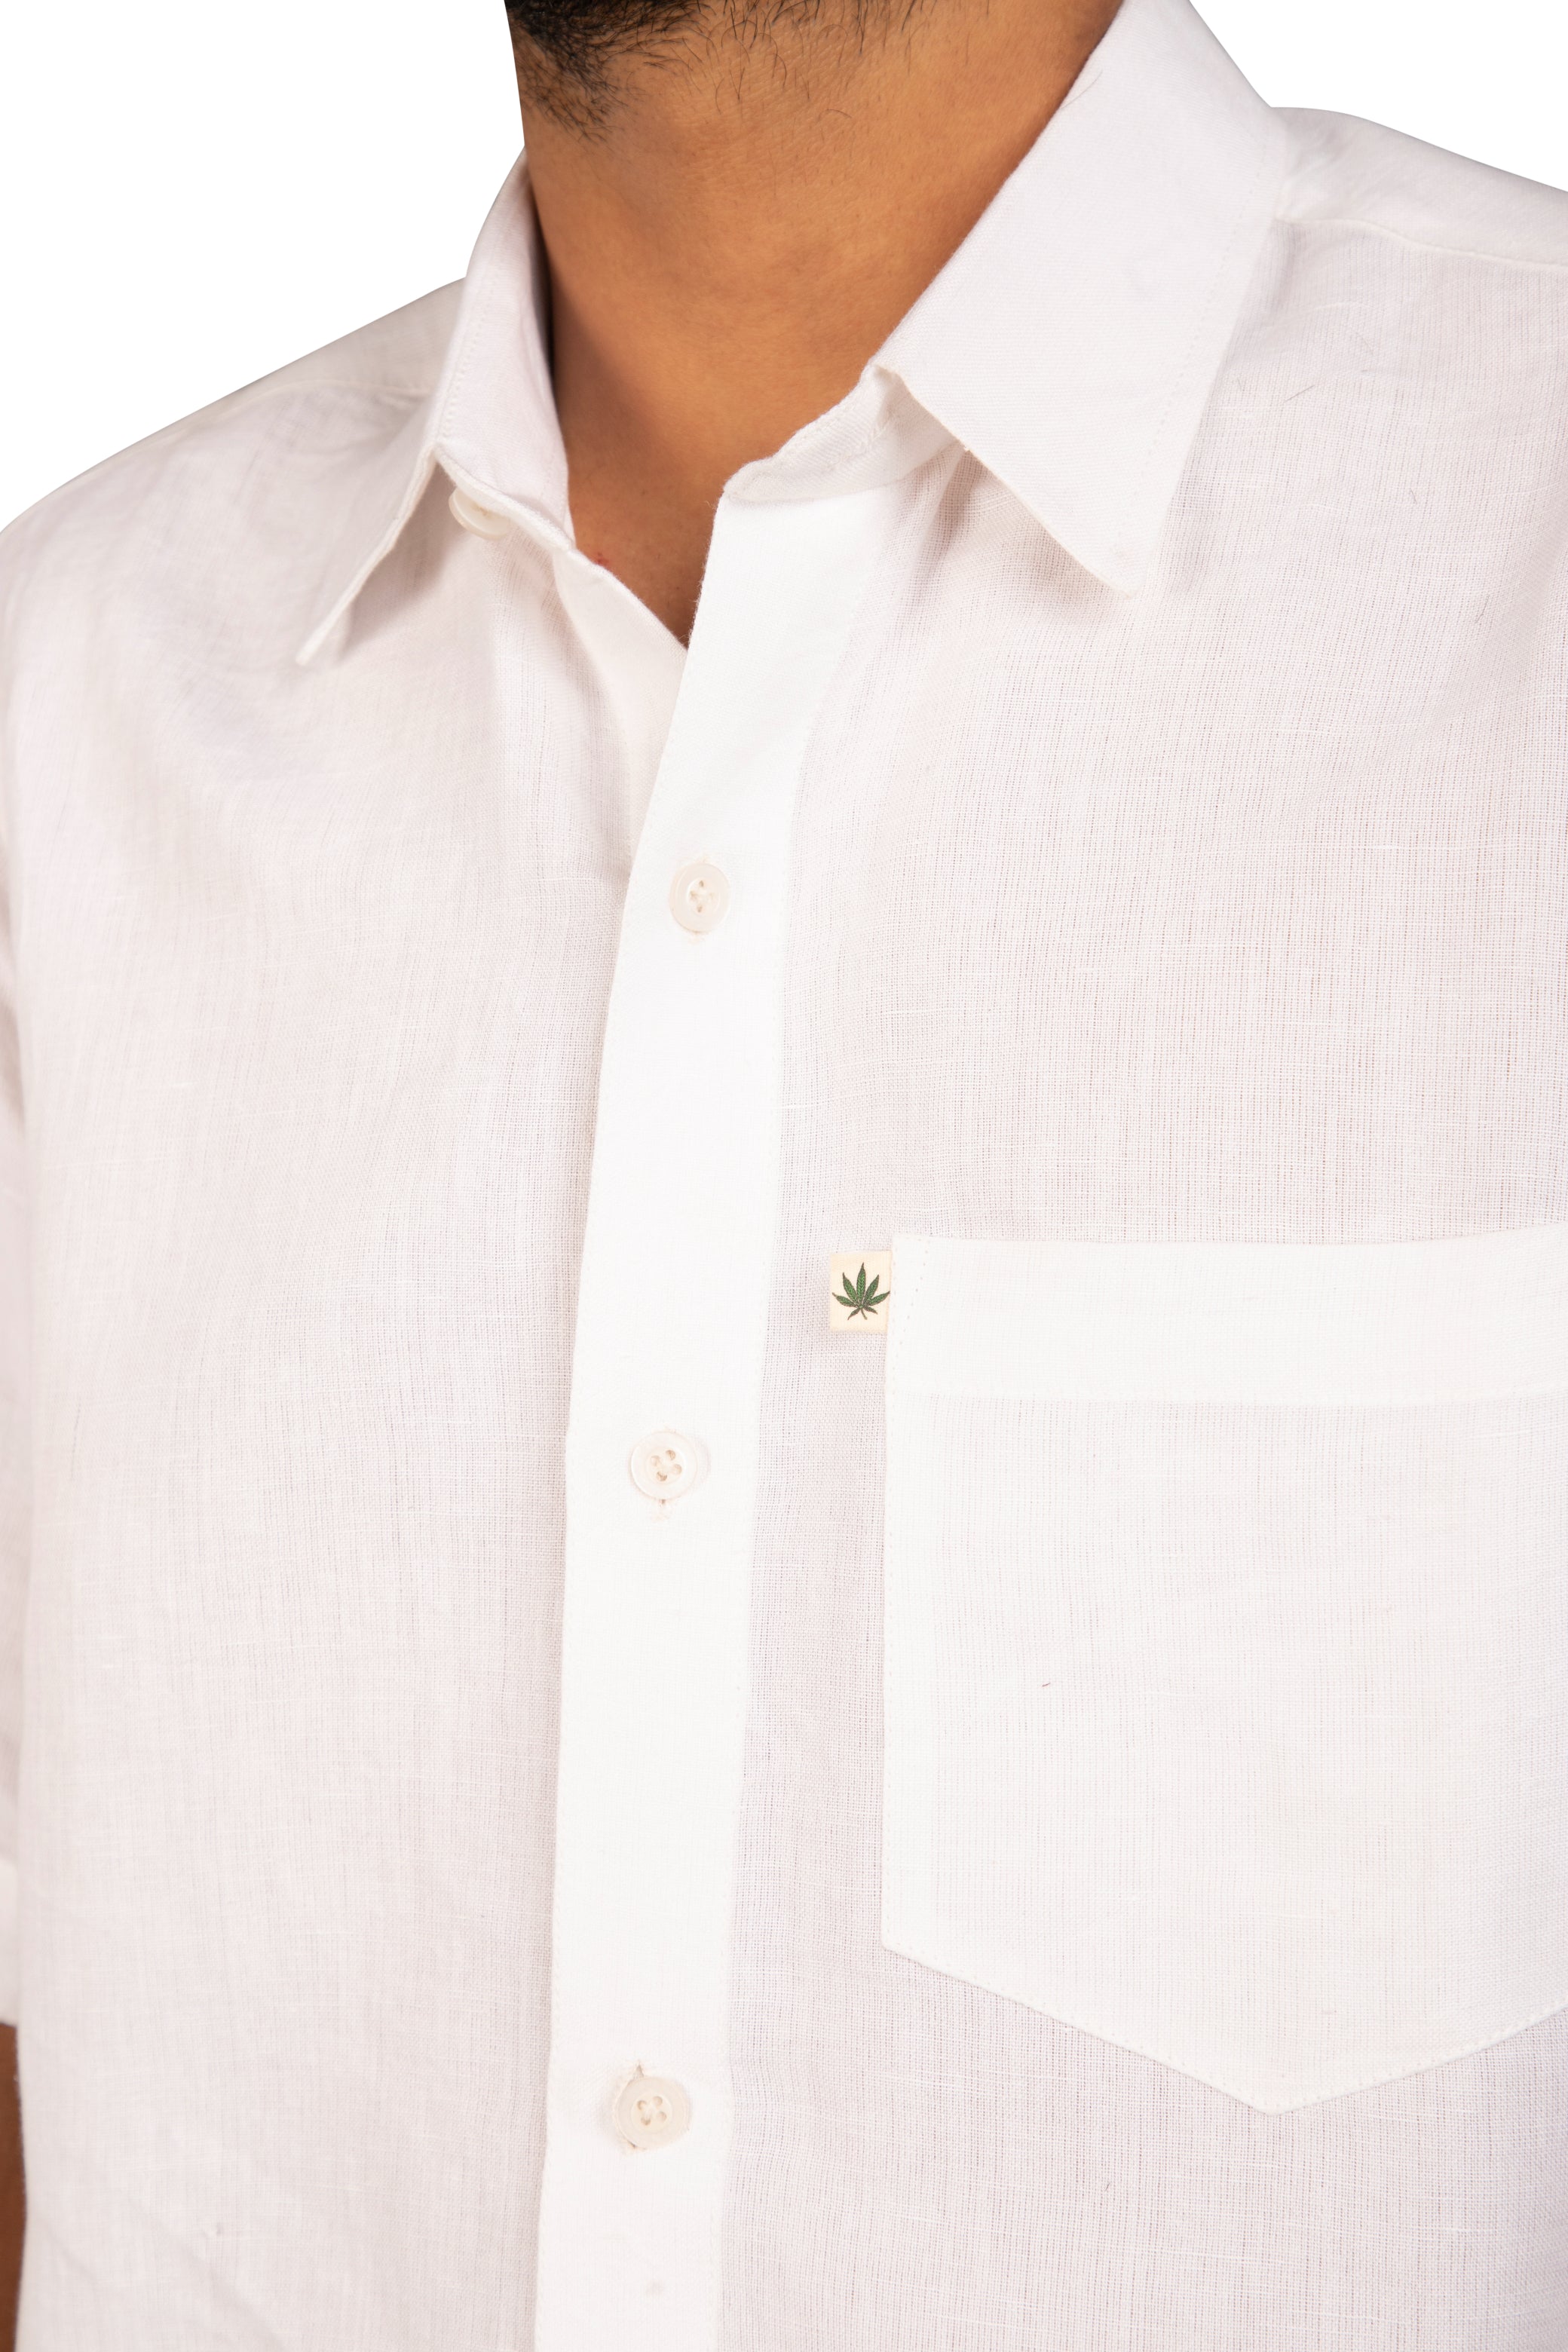 IVORY BUTTON FRONT SHIRT